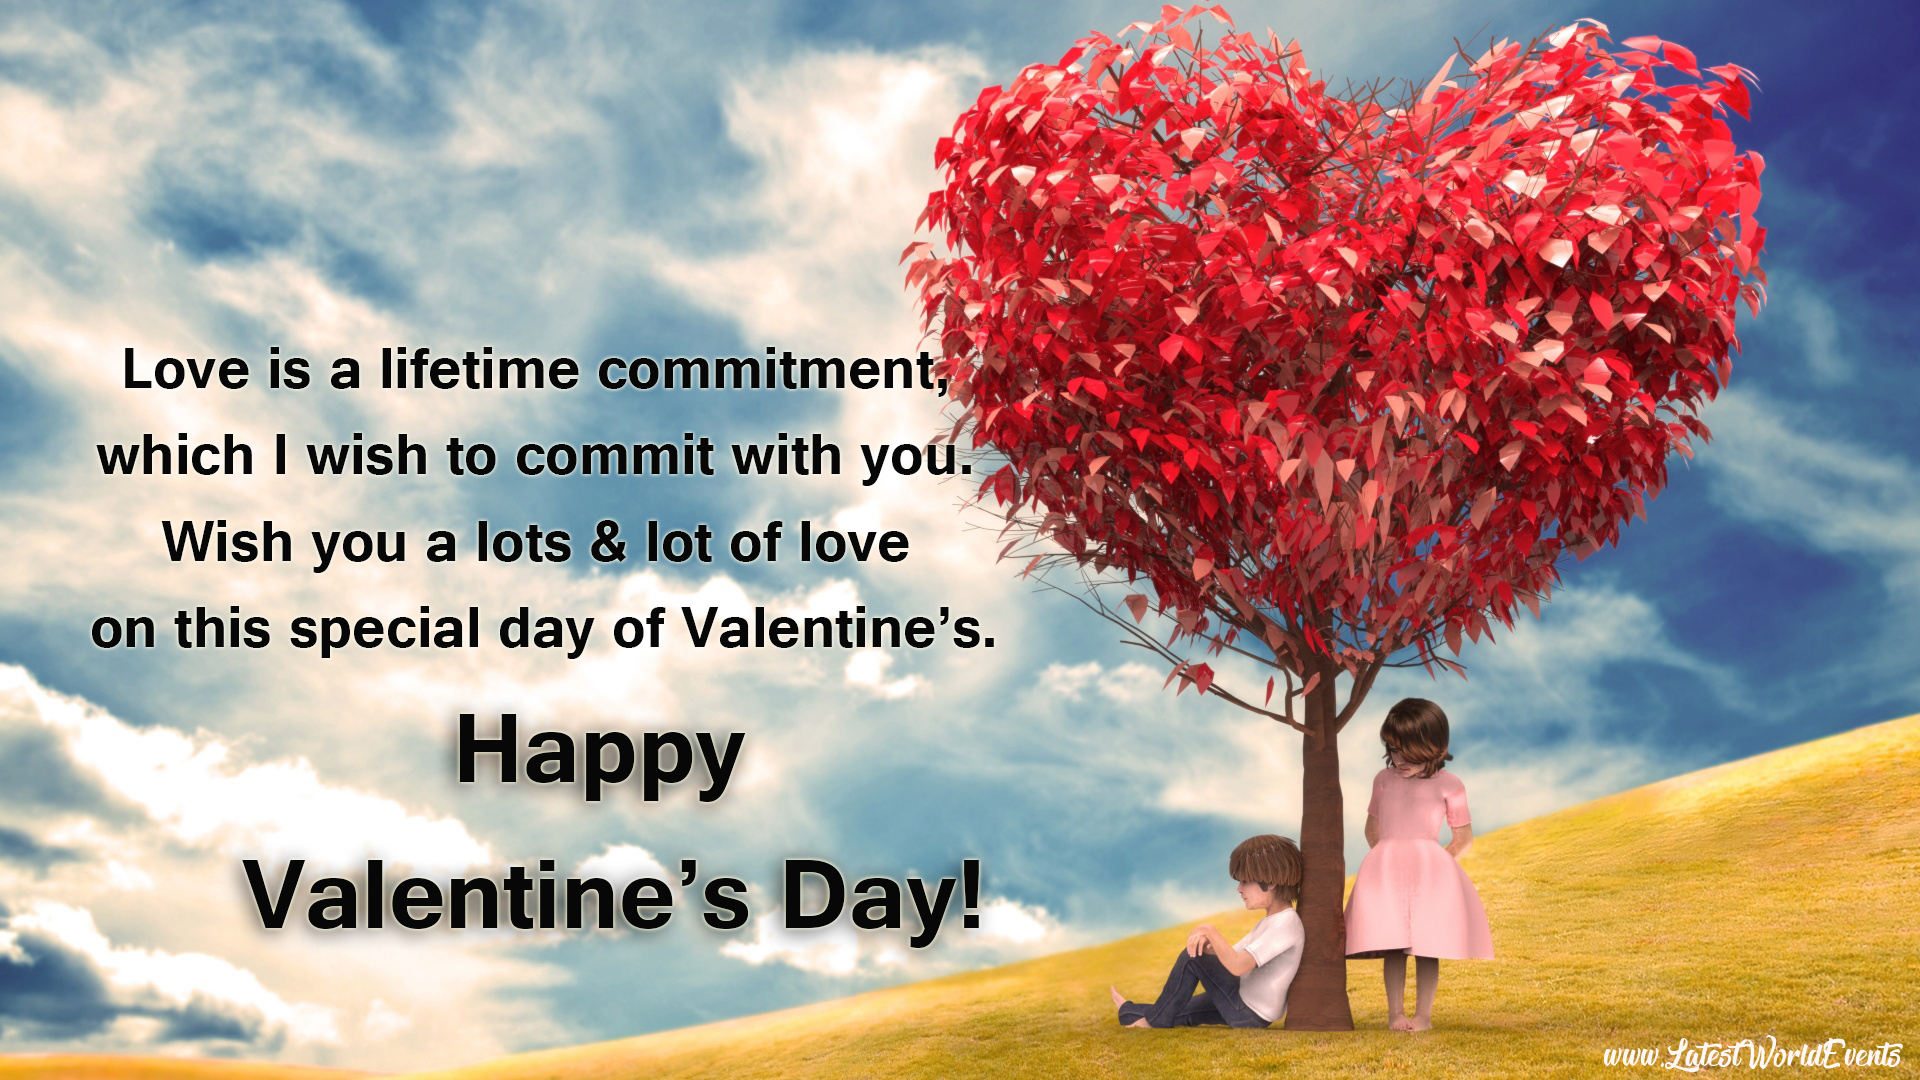 Download-romantic-valentines-gifts-for-husband-cards